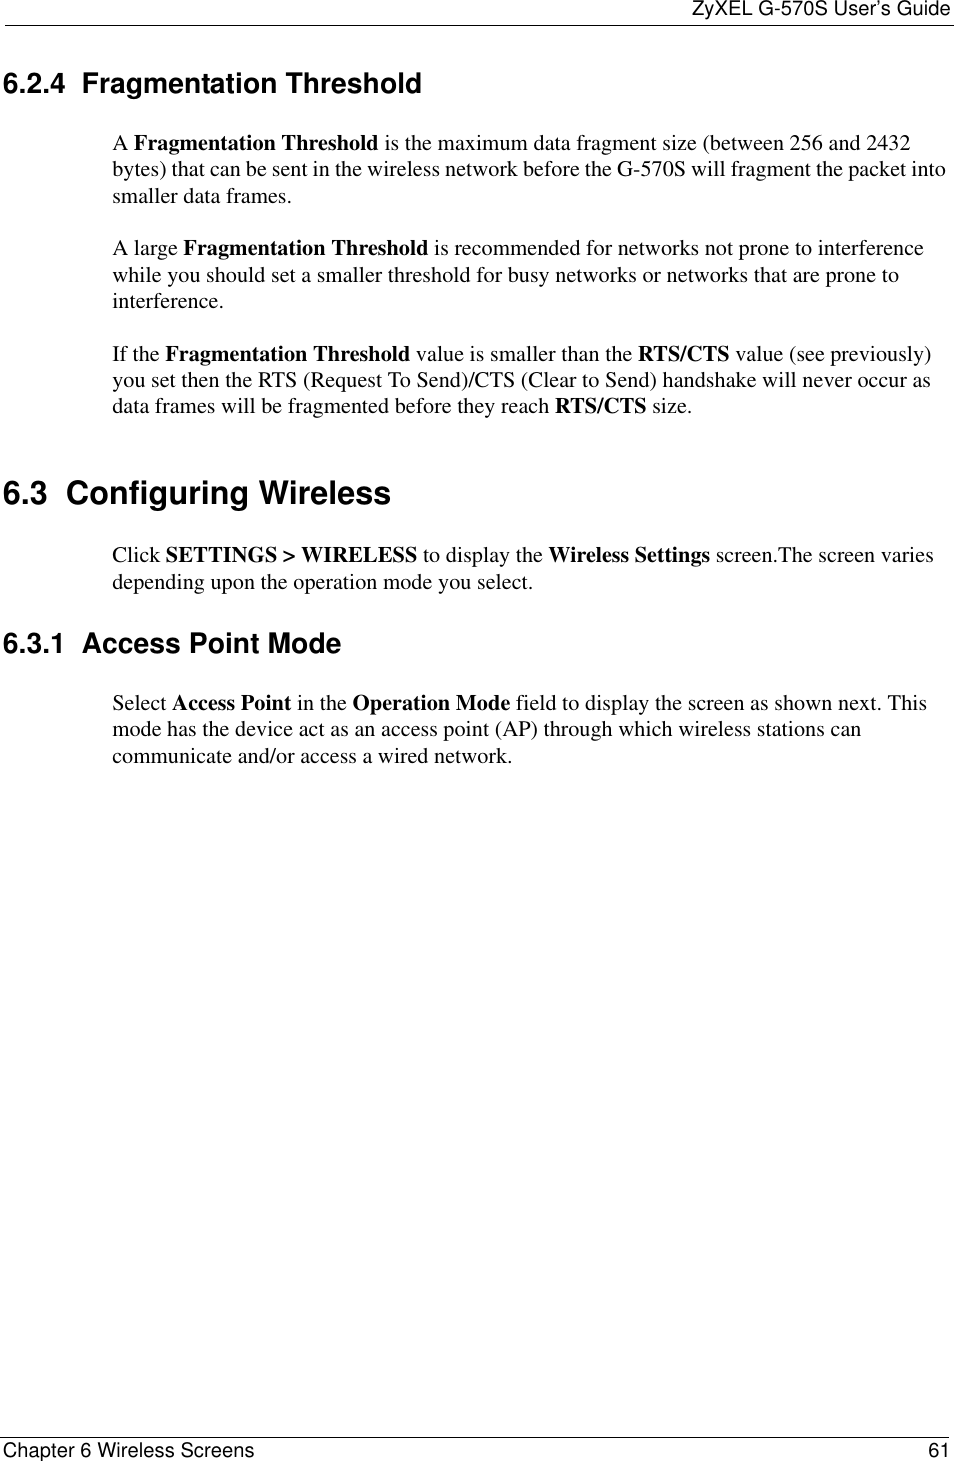 ZyXEL G-570S User’s GuideChapter 6 Wireless Screens 616.2.4  Fragmentation ThresholdAFragmentation Threshold is the maximum data fragment size (between 256 and 2432 bytes) that can be sent in the wireless network before the G-570S will fragment the packet into smaller data frames.A large Fragmentation Threshold is recommended for networks not prone to interference while you should set a smaller threshold for busy networks or networks that are prone to interference.If the Fragmentation Threshold value is smaller than the RTS/CTS value (see previously) you set then the RTS (Request To Send)/CTS (Clear to Send) handshake will never occur as data frames will be fragmented before they reach RTS/CTS size.6.3  Configuring Wireless Click SETTINGS &gt; WIRELESS to display the Wireless Settings screen.The screen varies depending upon the operation mode you select.6.3.1  Access Point Mode Select Access Point in the Operation Mode field to display the screen as shown next. This mode has the device act as an access point (AP) through which wireless stations can communicate and/or access a wired network.